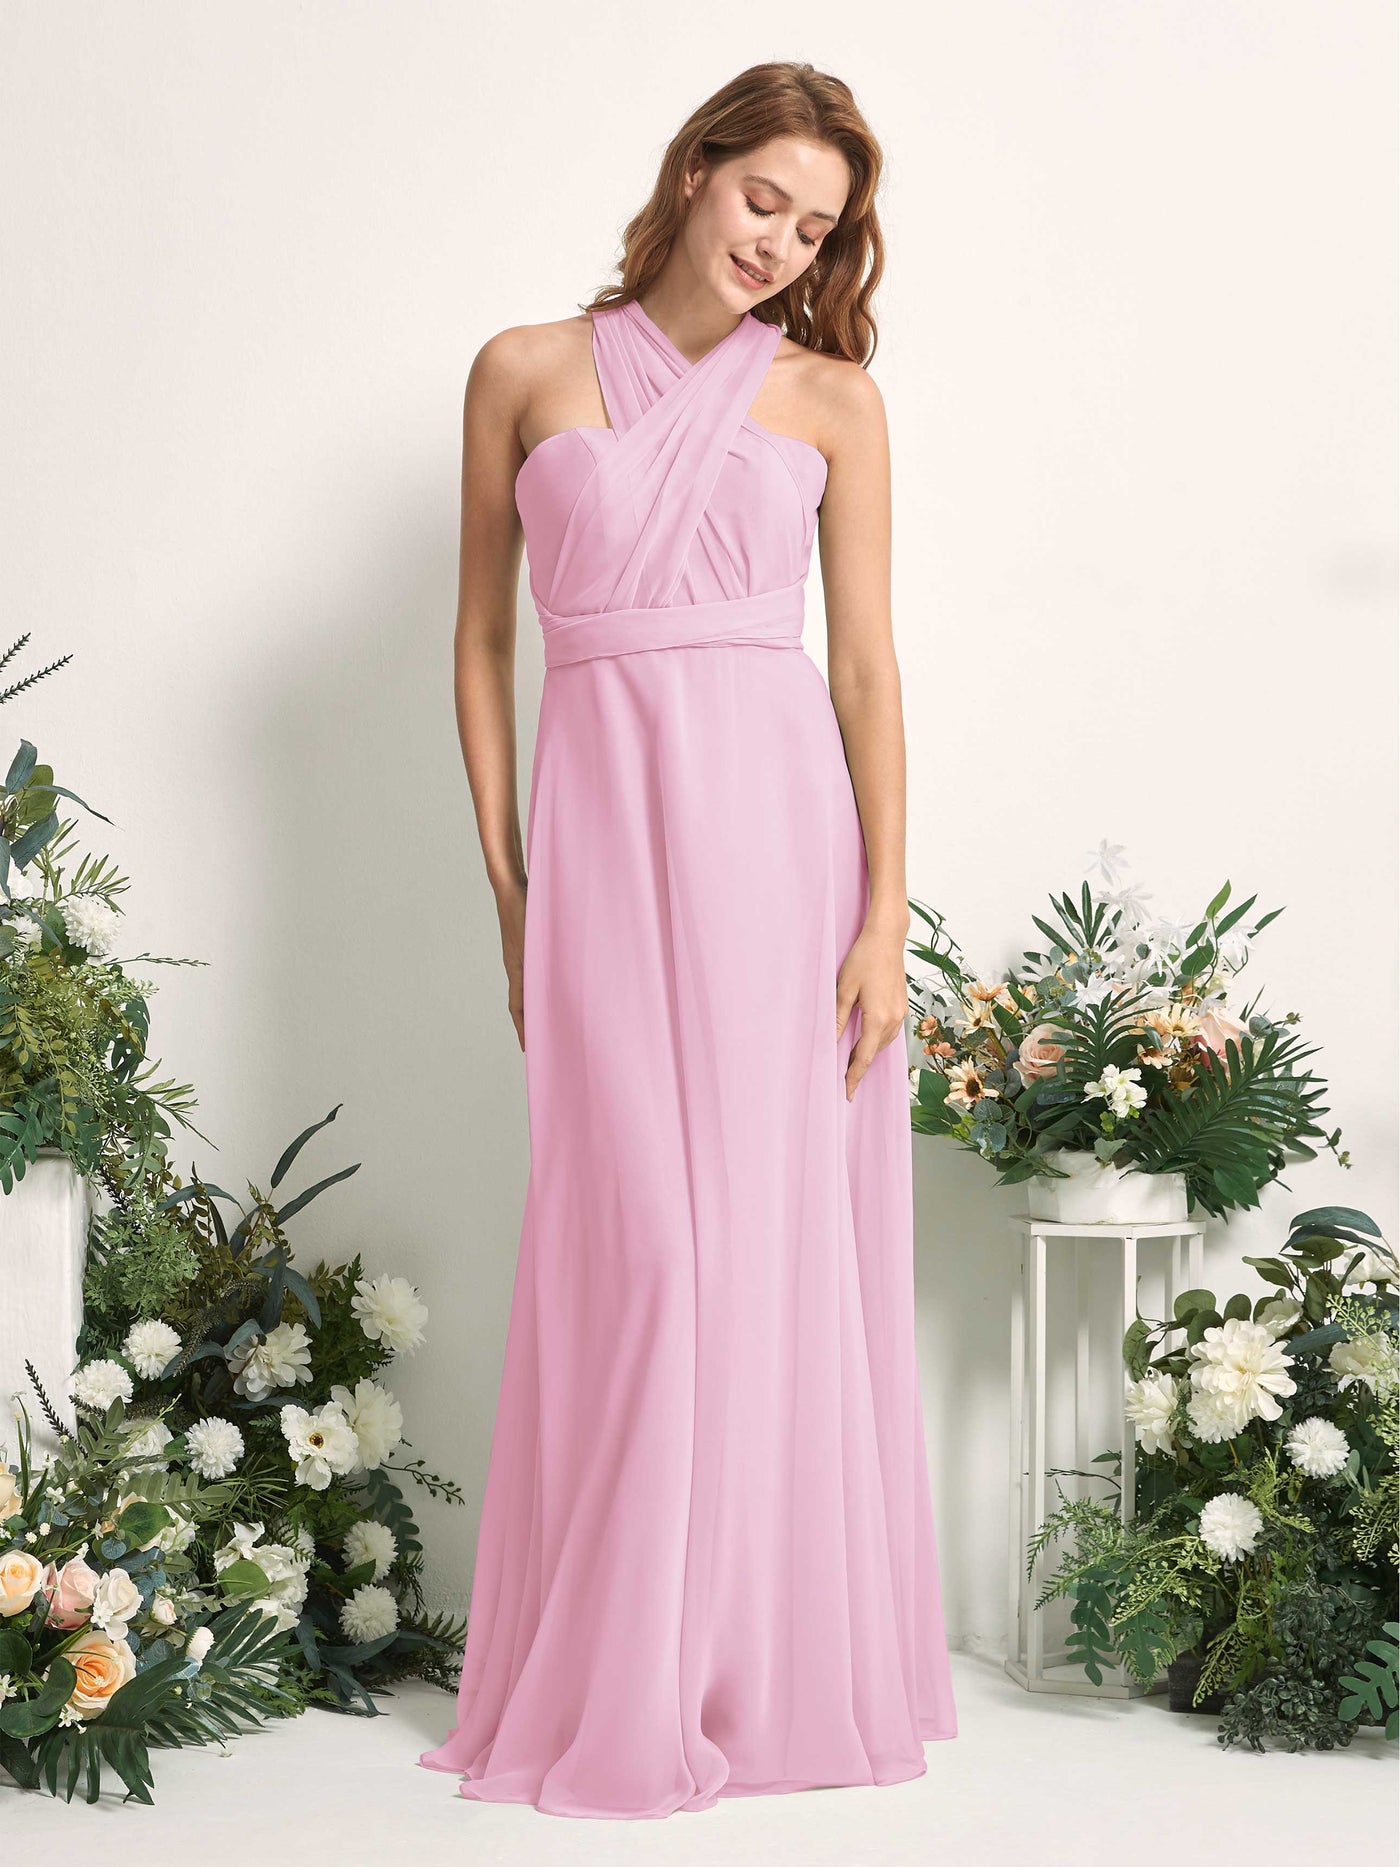 Bridesmaid Dress A-line Chiffon Halter Full Length Short Sleeves Wedding Party Dress - Candy Pink (81226339)#color_candy-pink